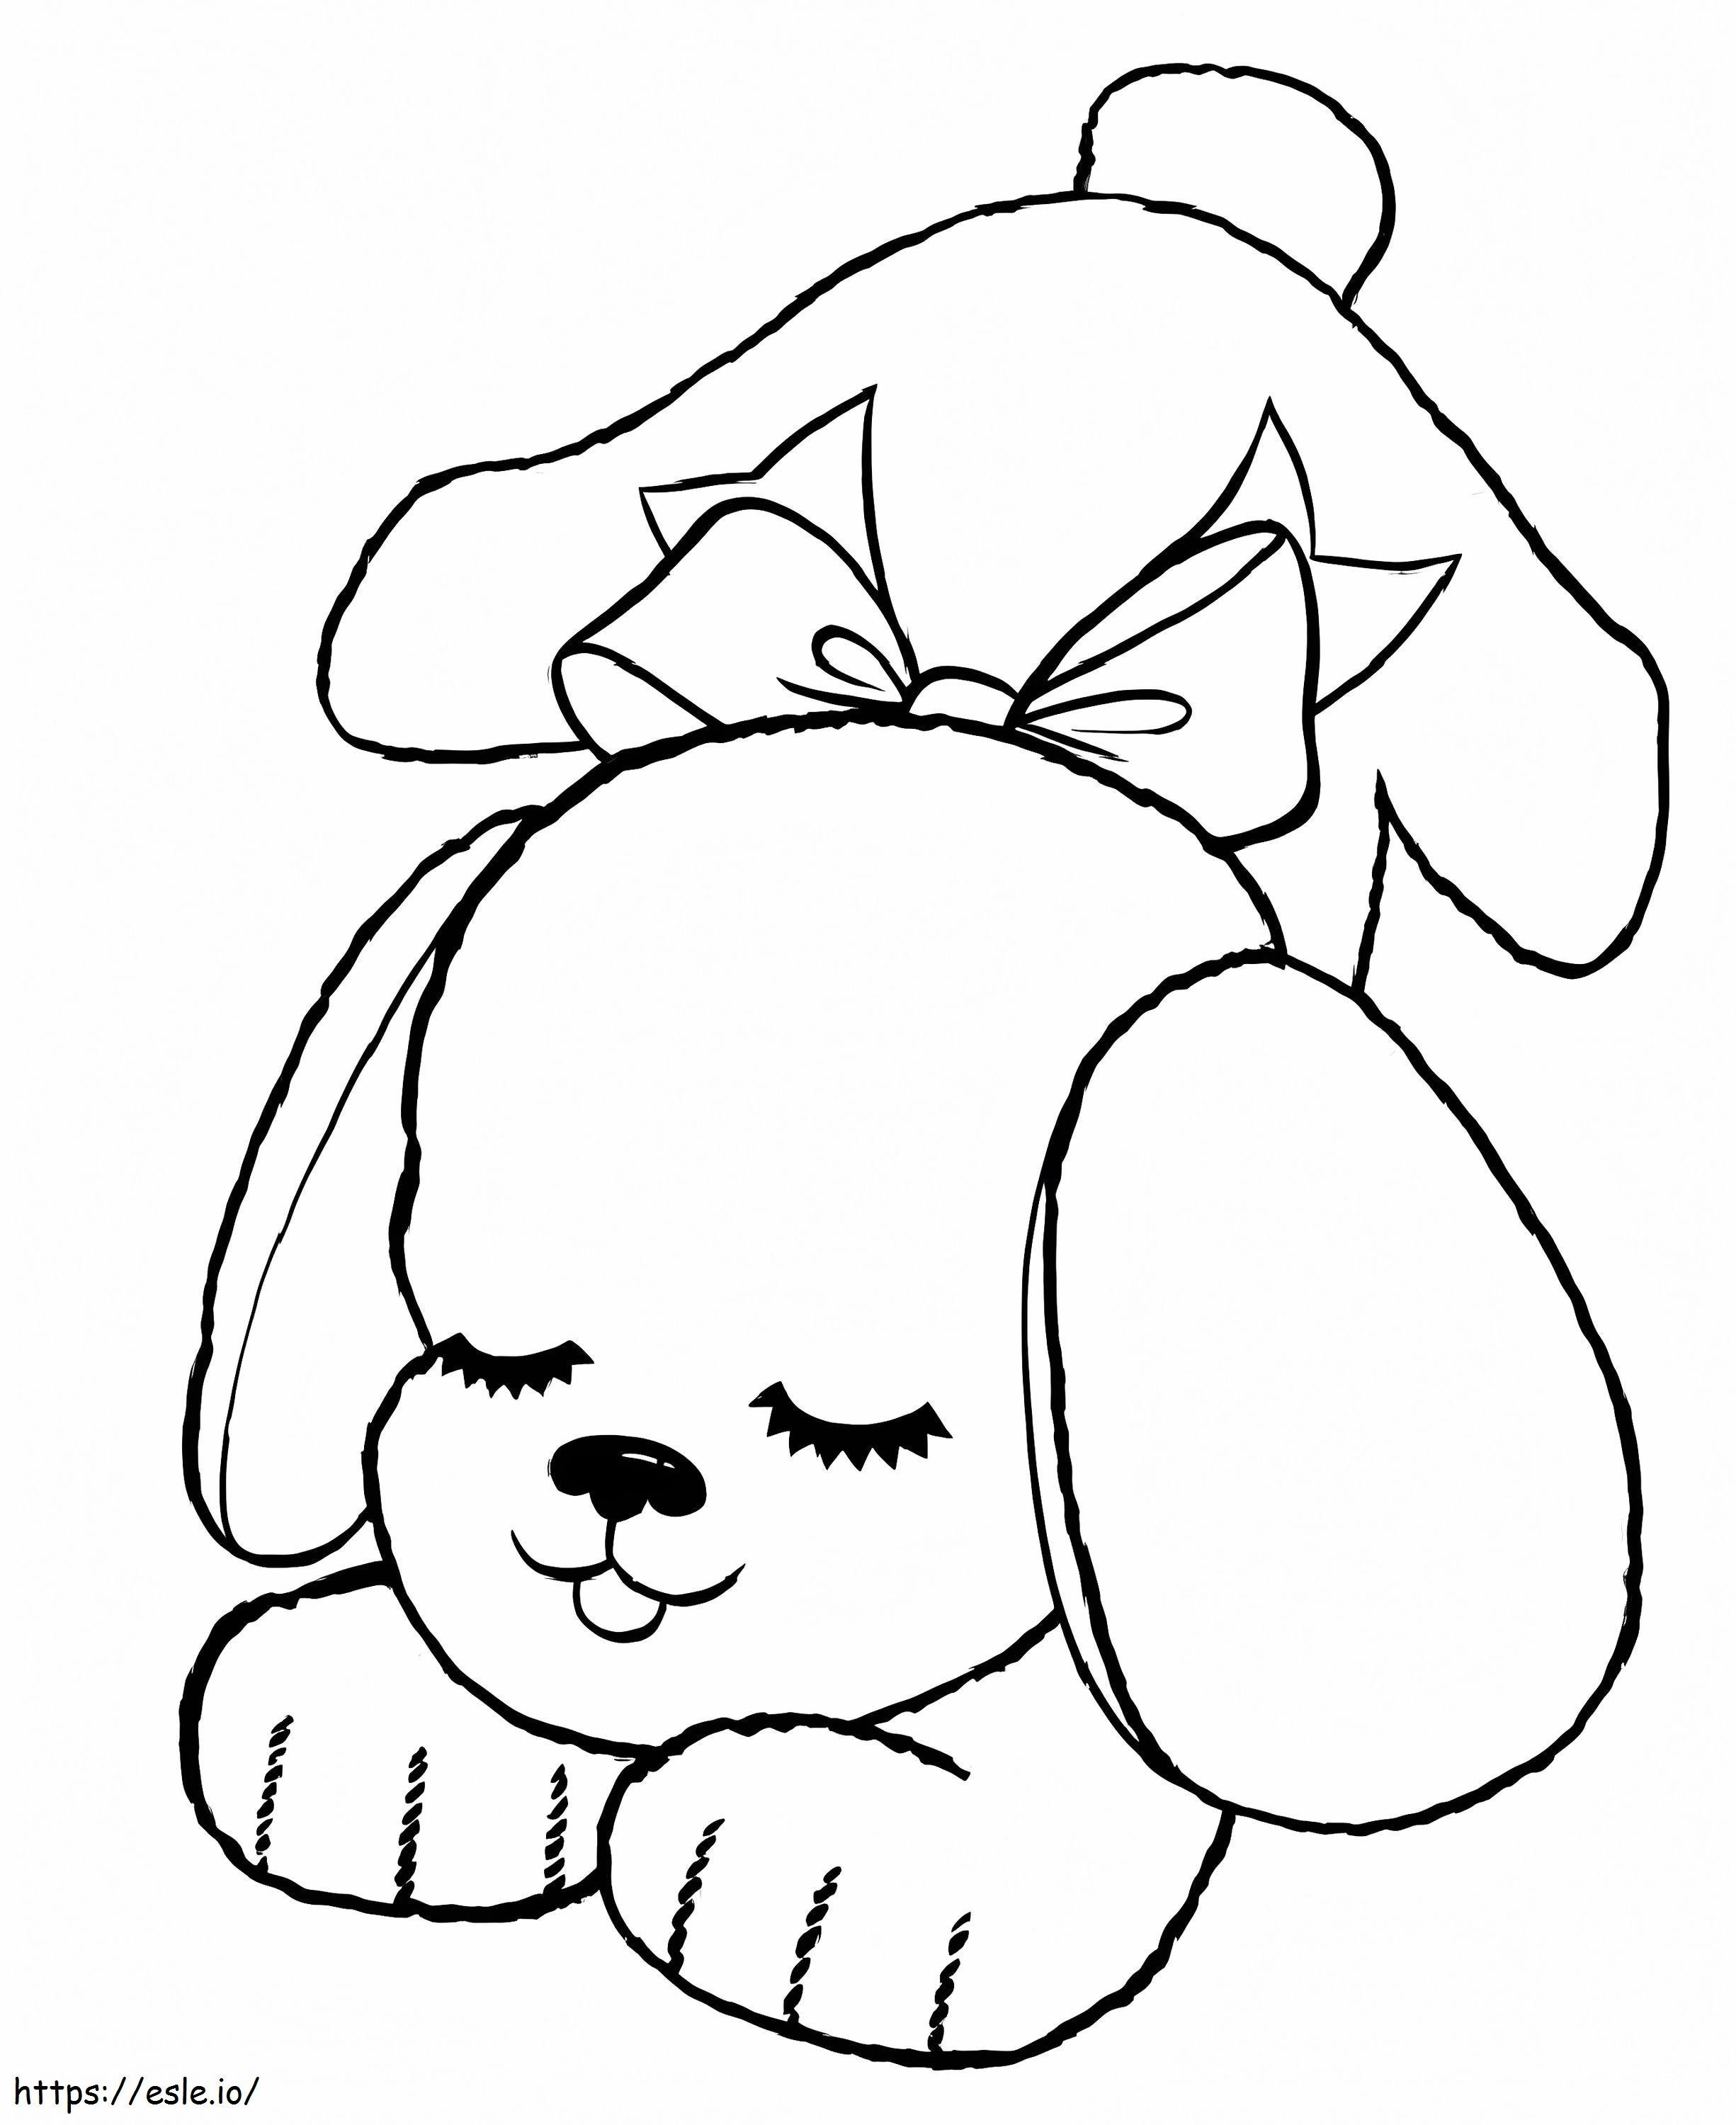 Draw A Sleeping Dog coloring page